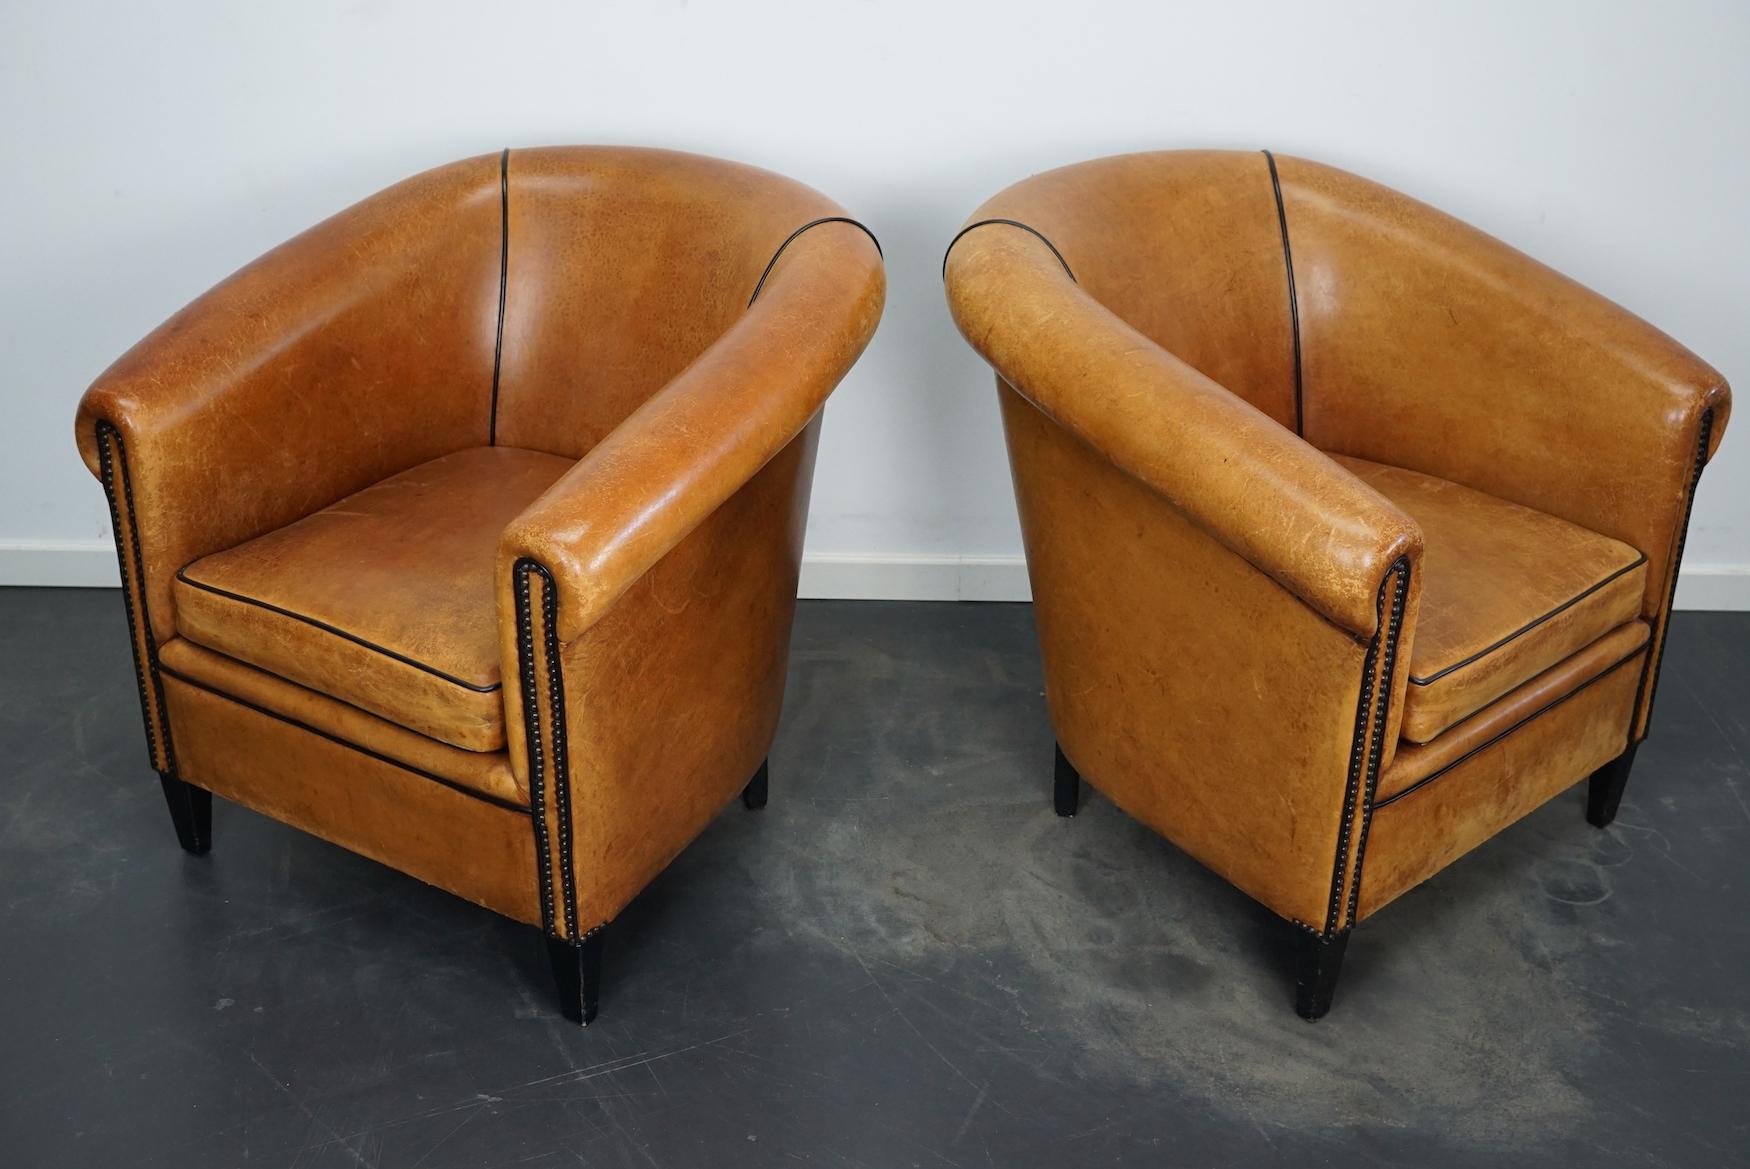 This pair of cognac/burgundy-colored leather club chairs come from the Netherlands. They are upholstered with hand patinated leather and feature black piping and wooden legs.